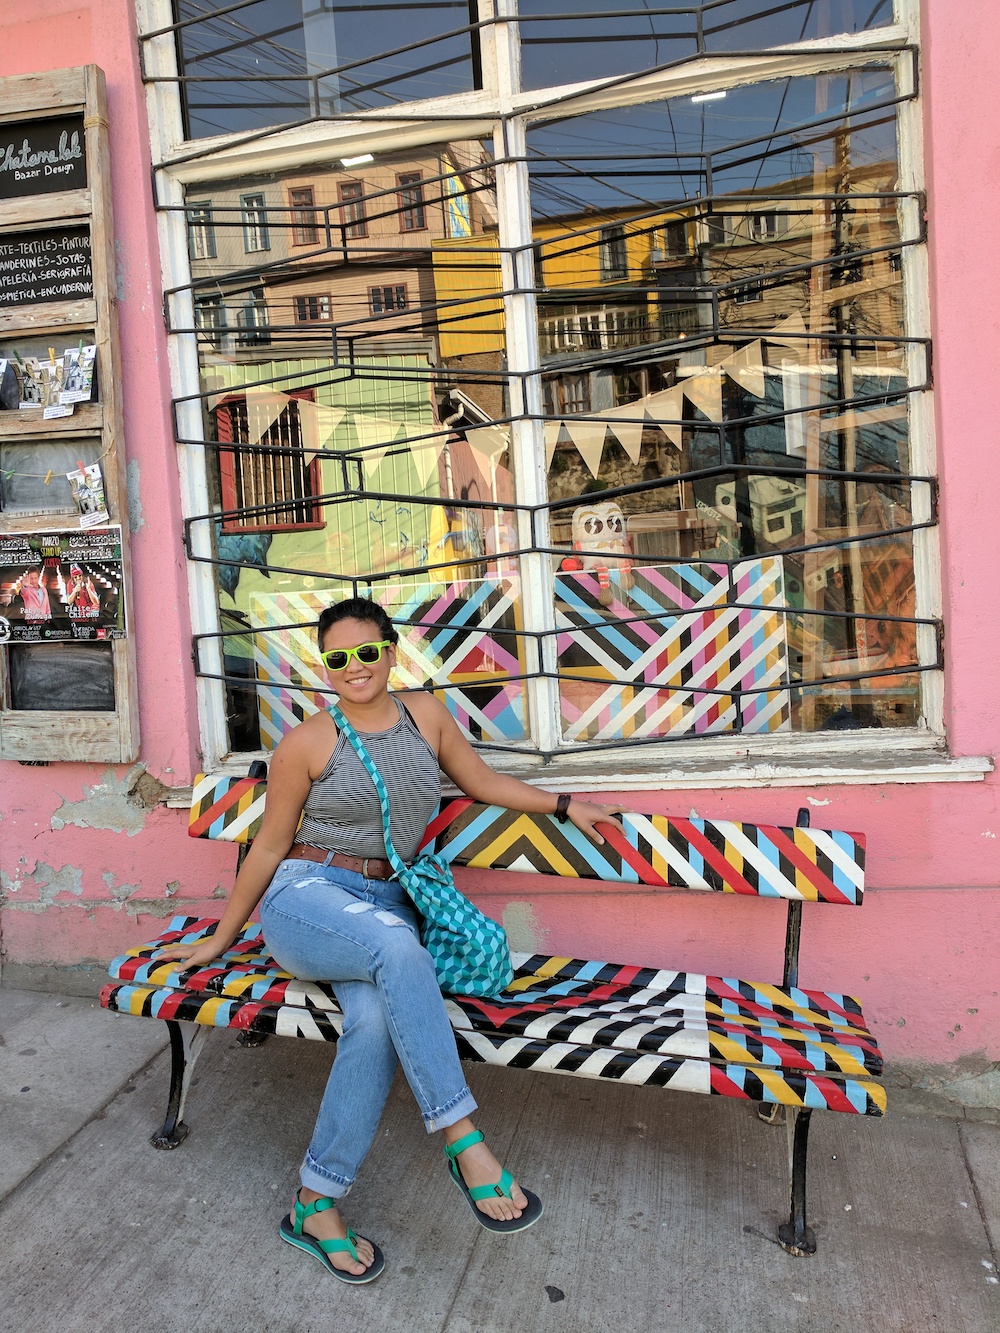 Colorful pink wall and bench in Valparaiso Chile